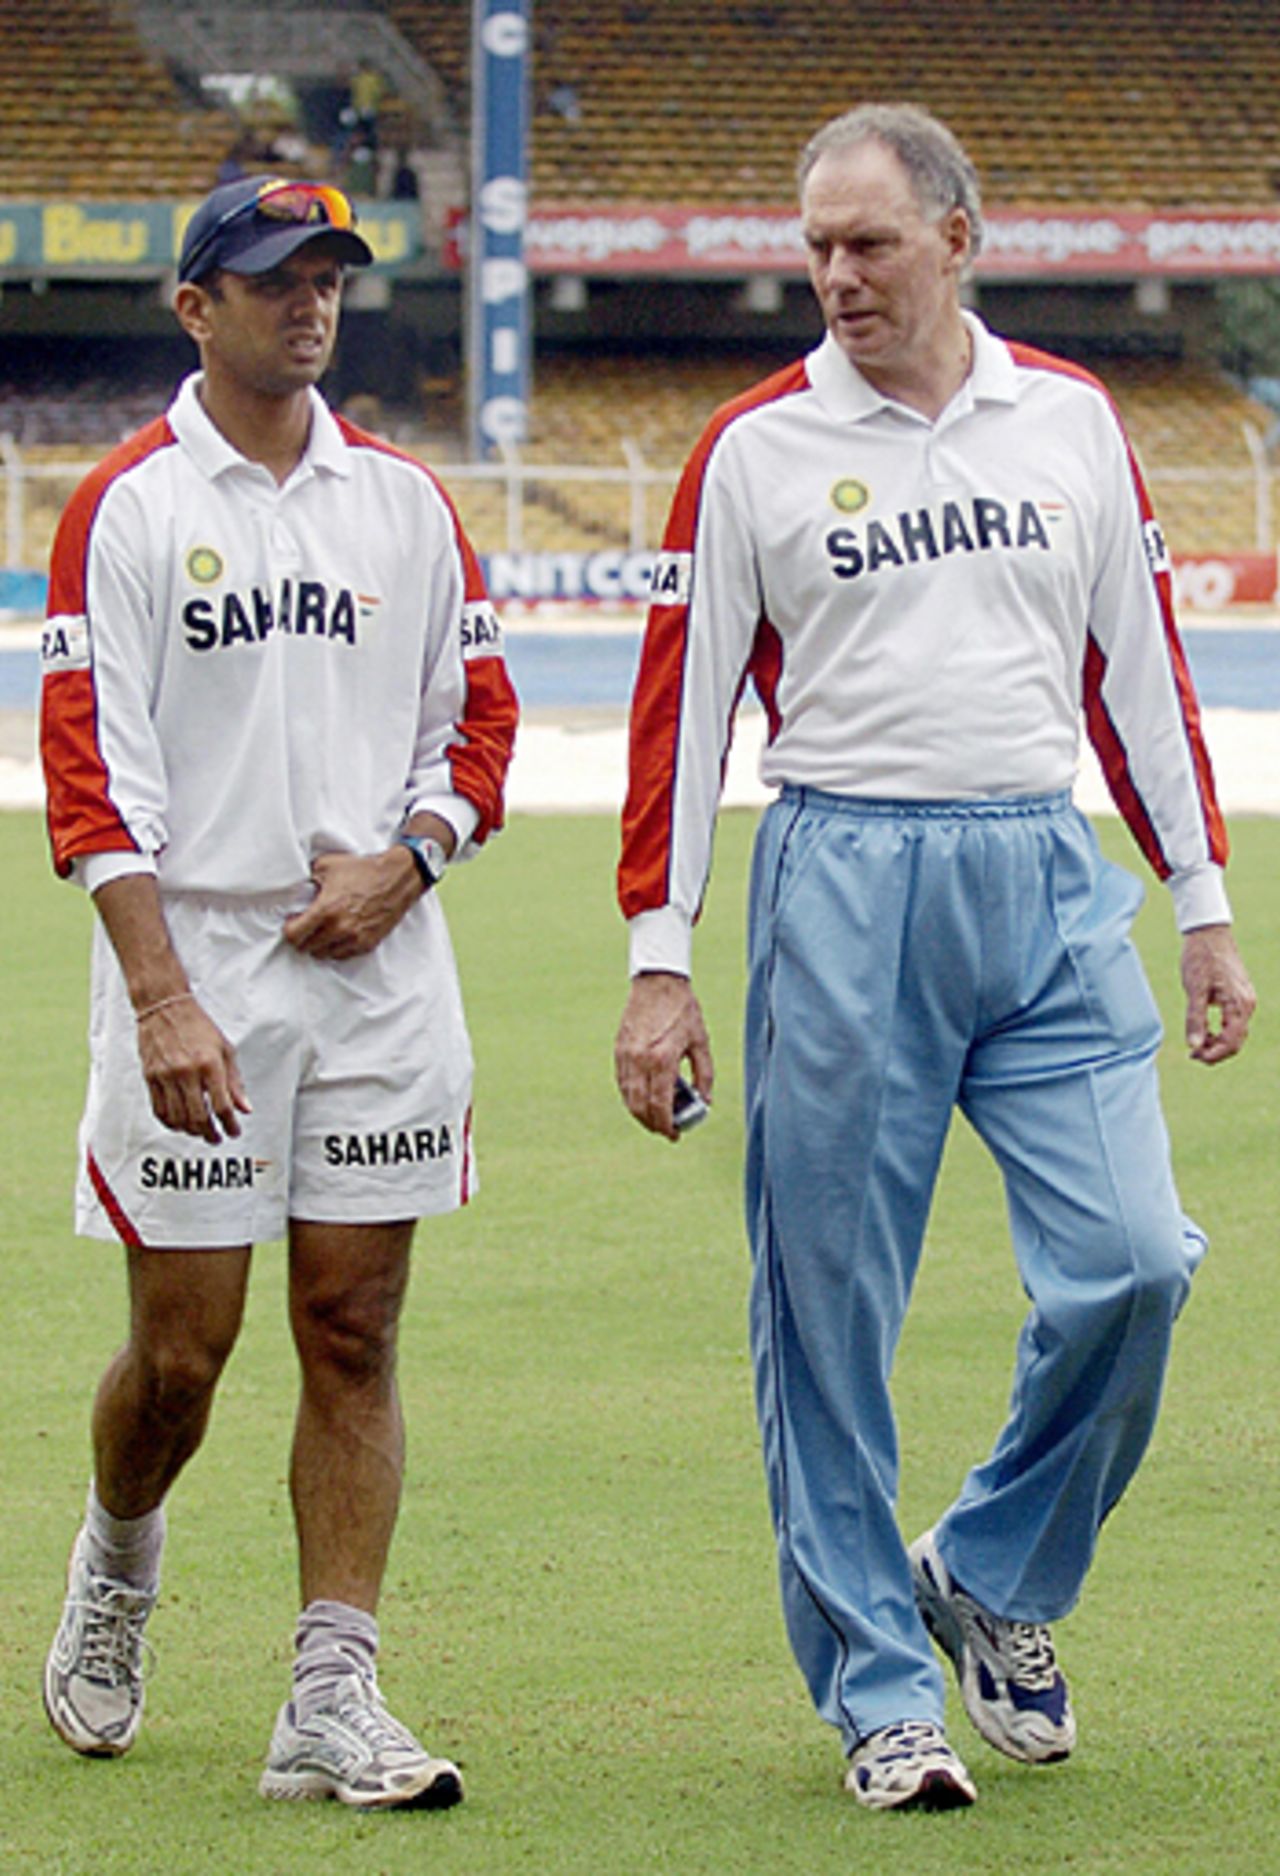 Rahul Dravid and Greg Chappell chat after the second day was abandoned, India v Sri Lanka, 1st Test, Chennai, December 3, 2005